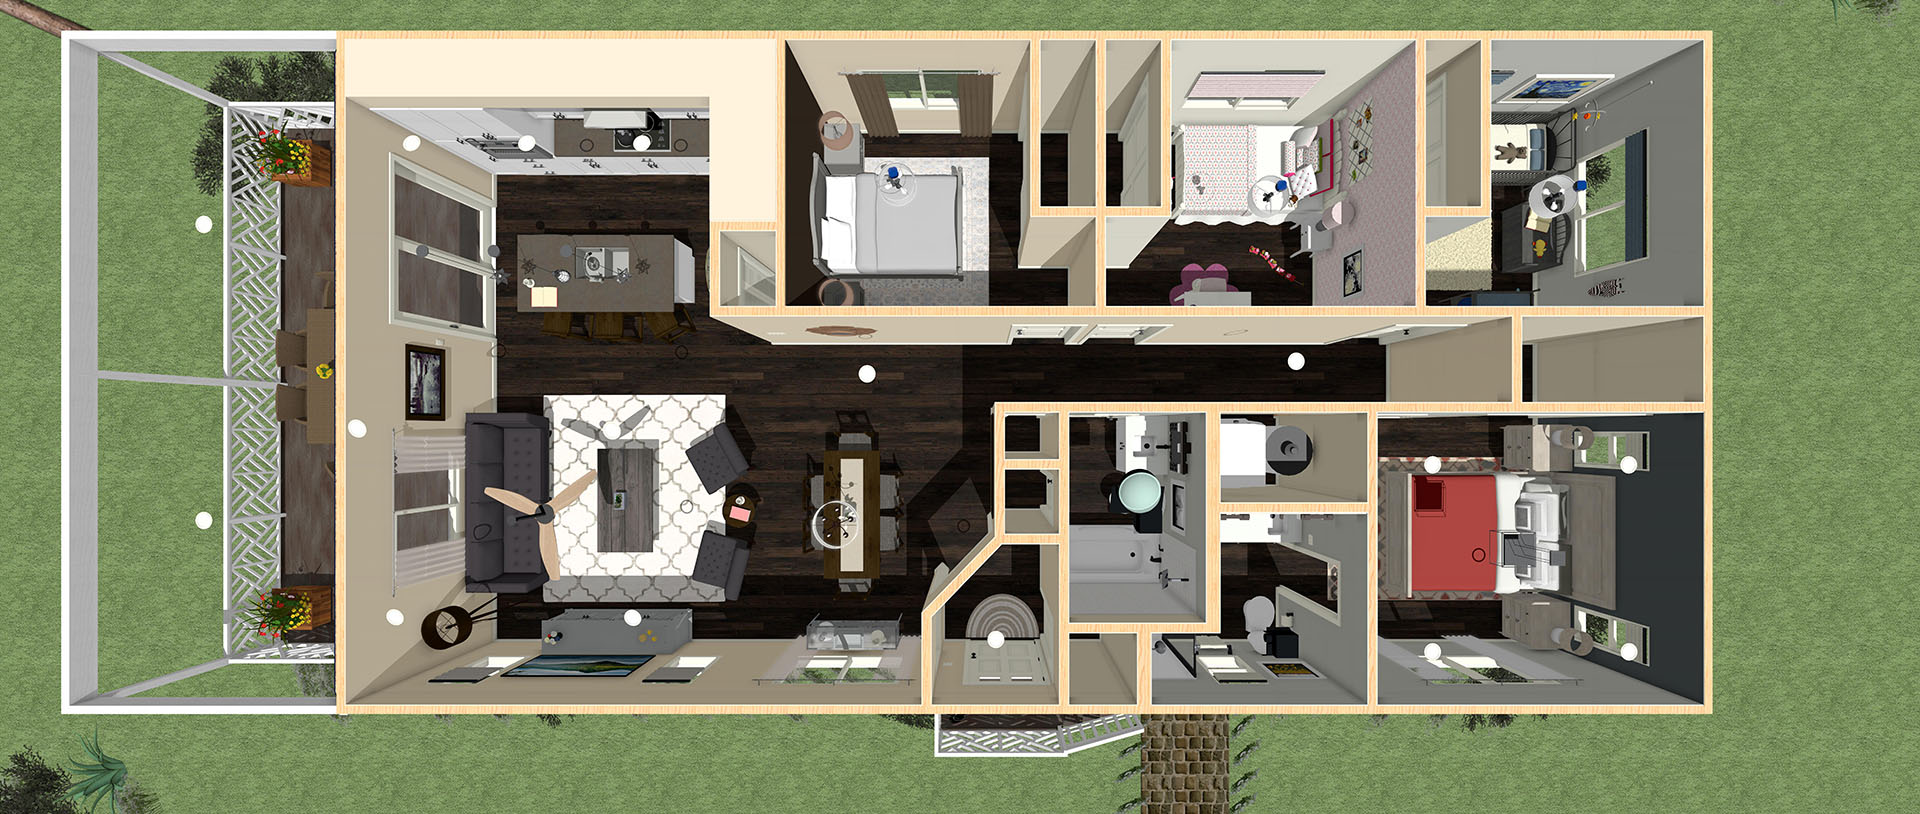 Aerial view of a house and its rooms